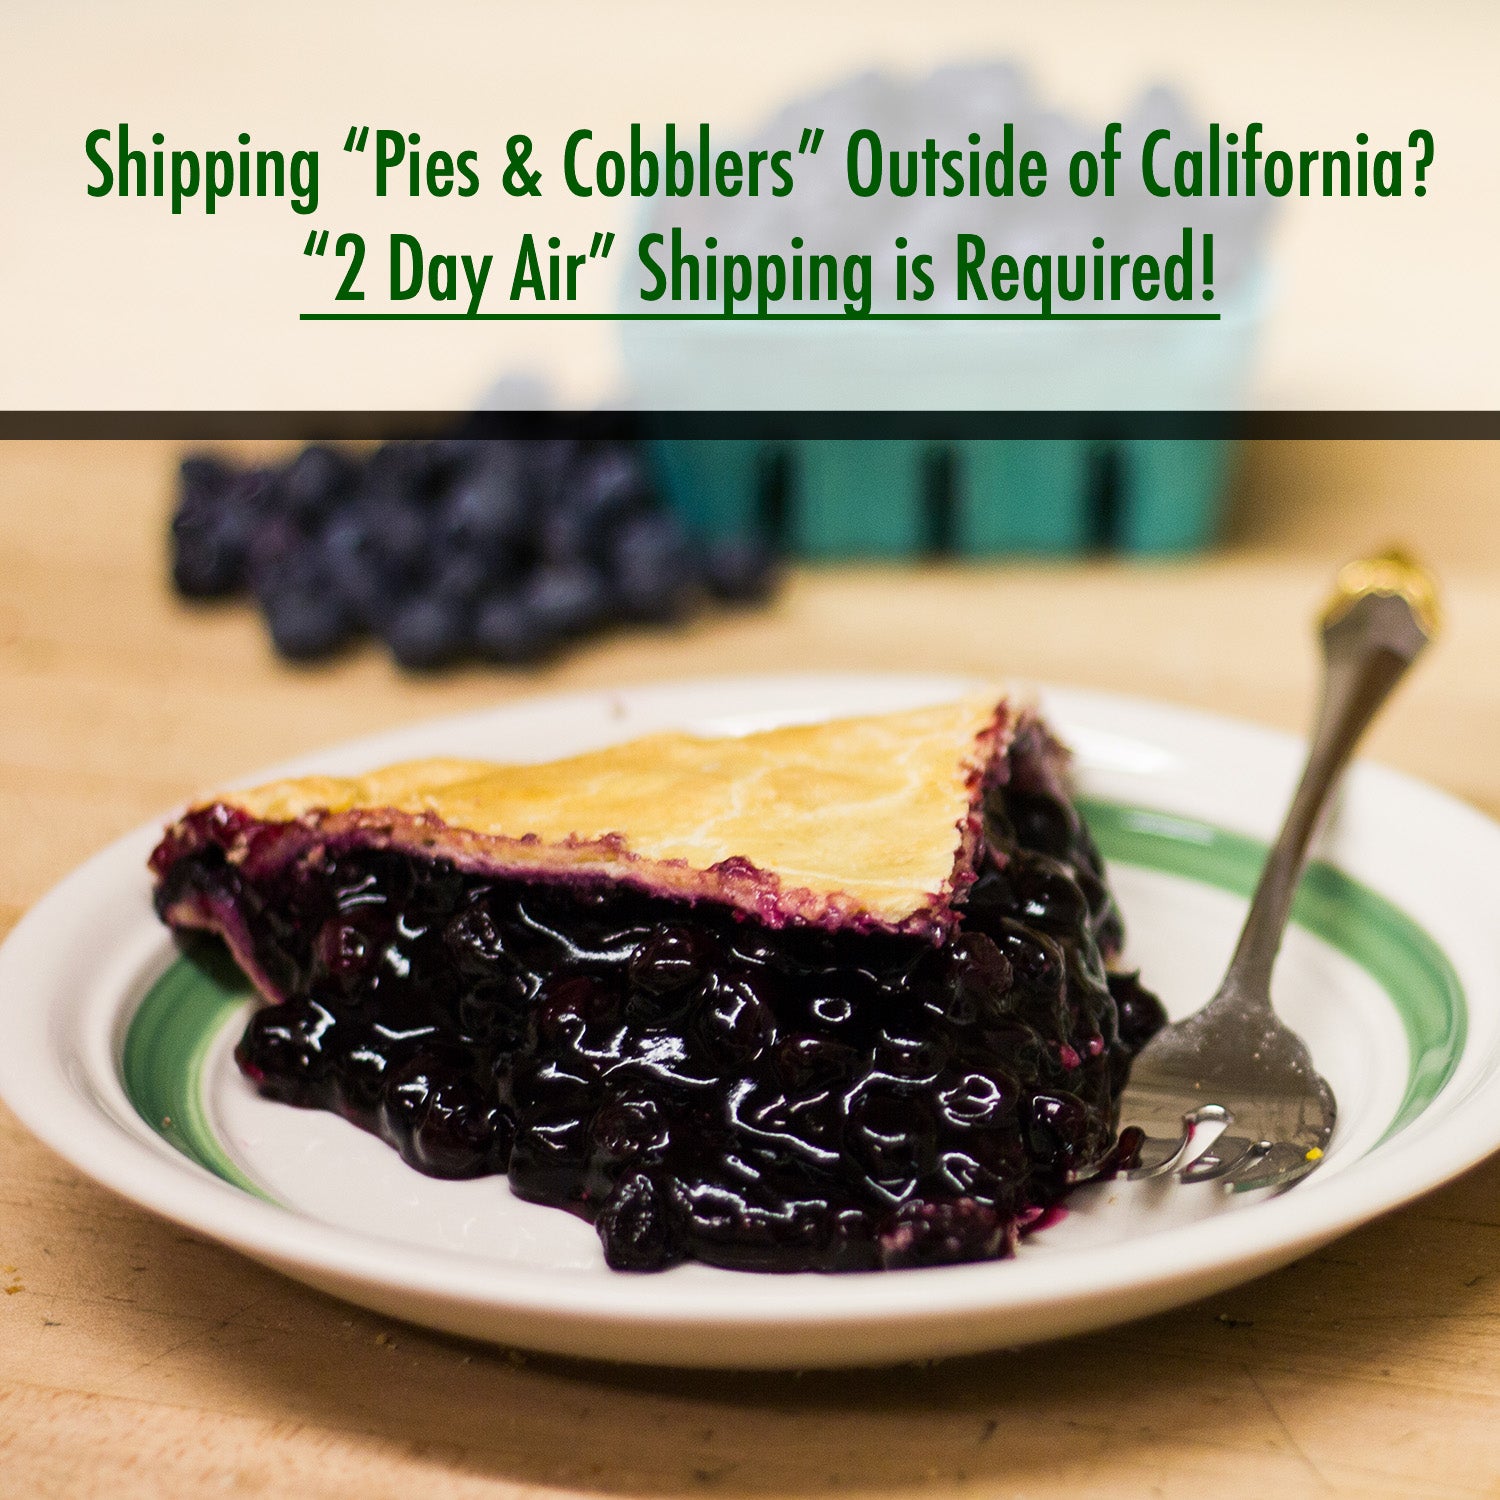 Blueberry pie, if shipping outside of california, 2 day air shipping required